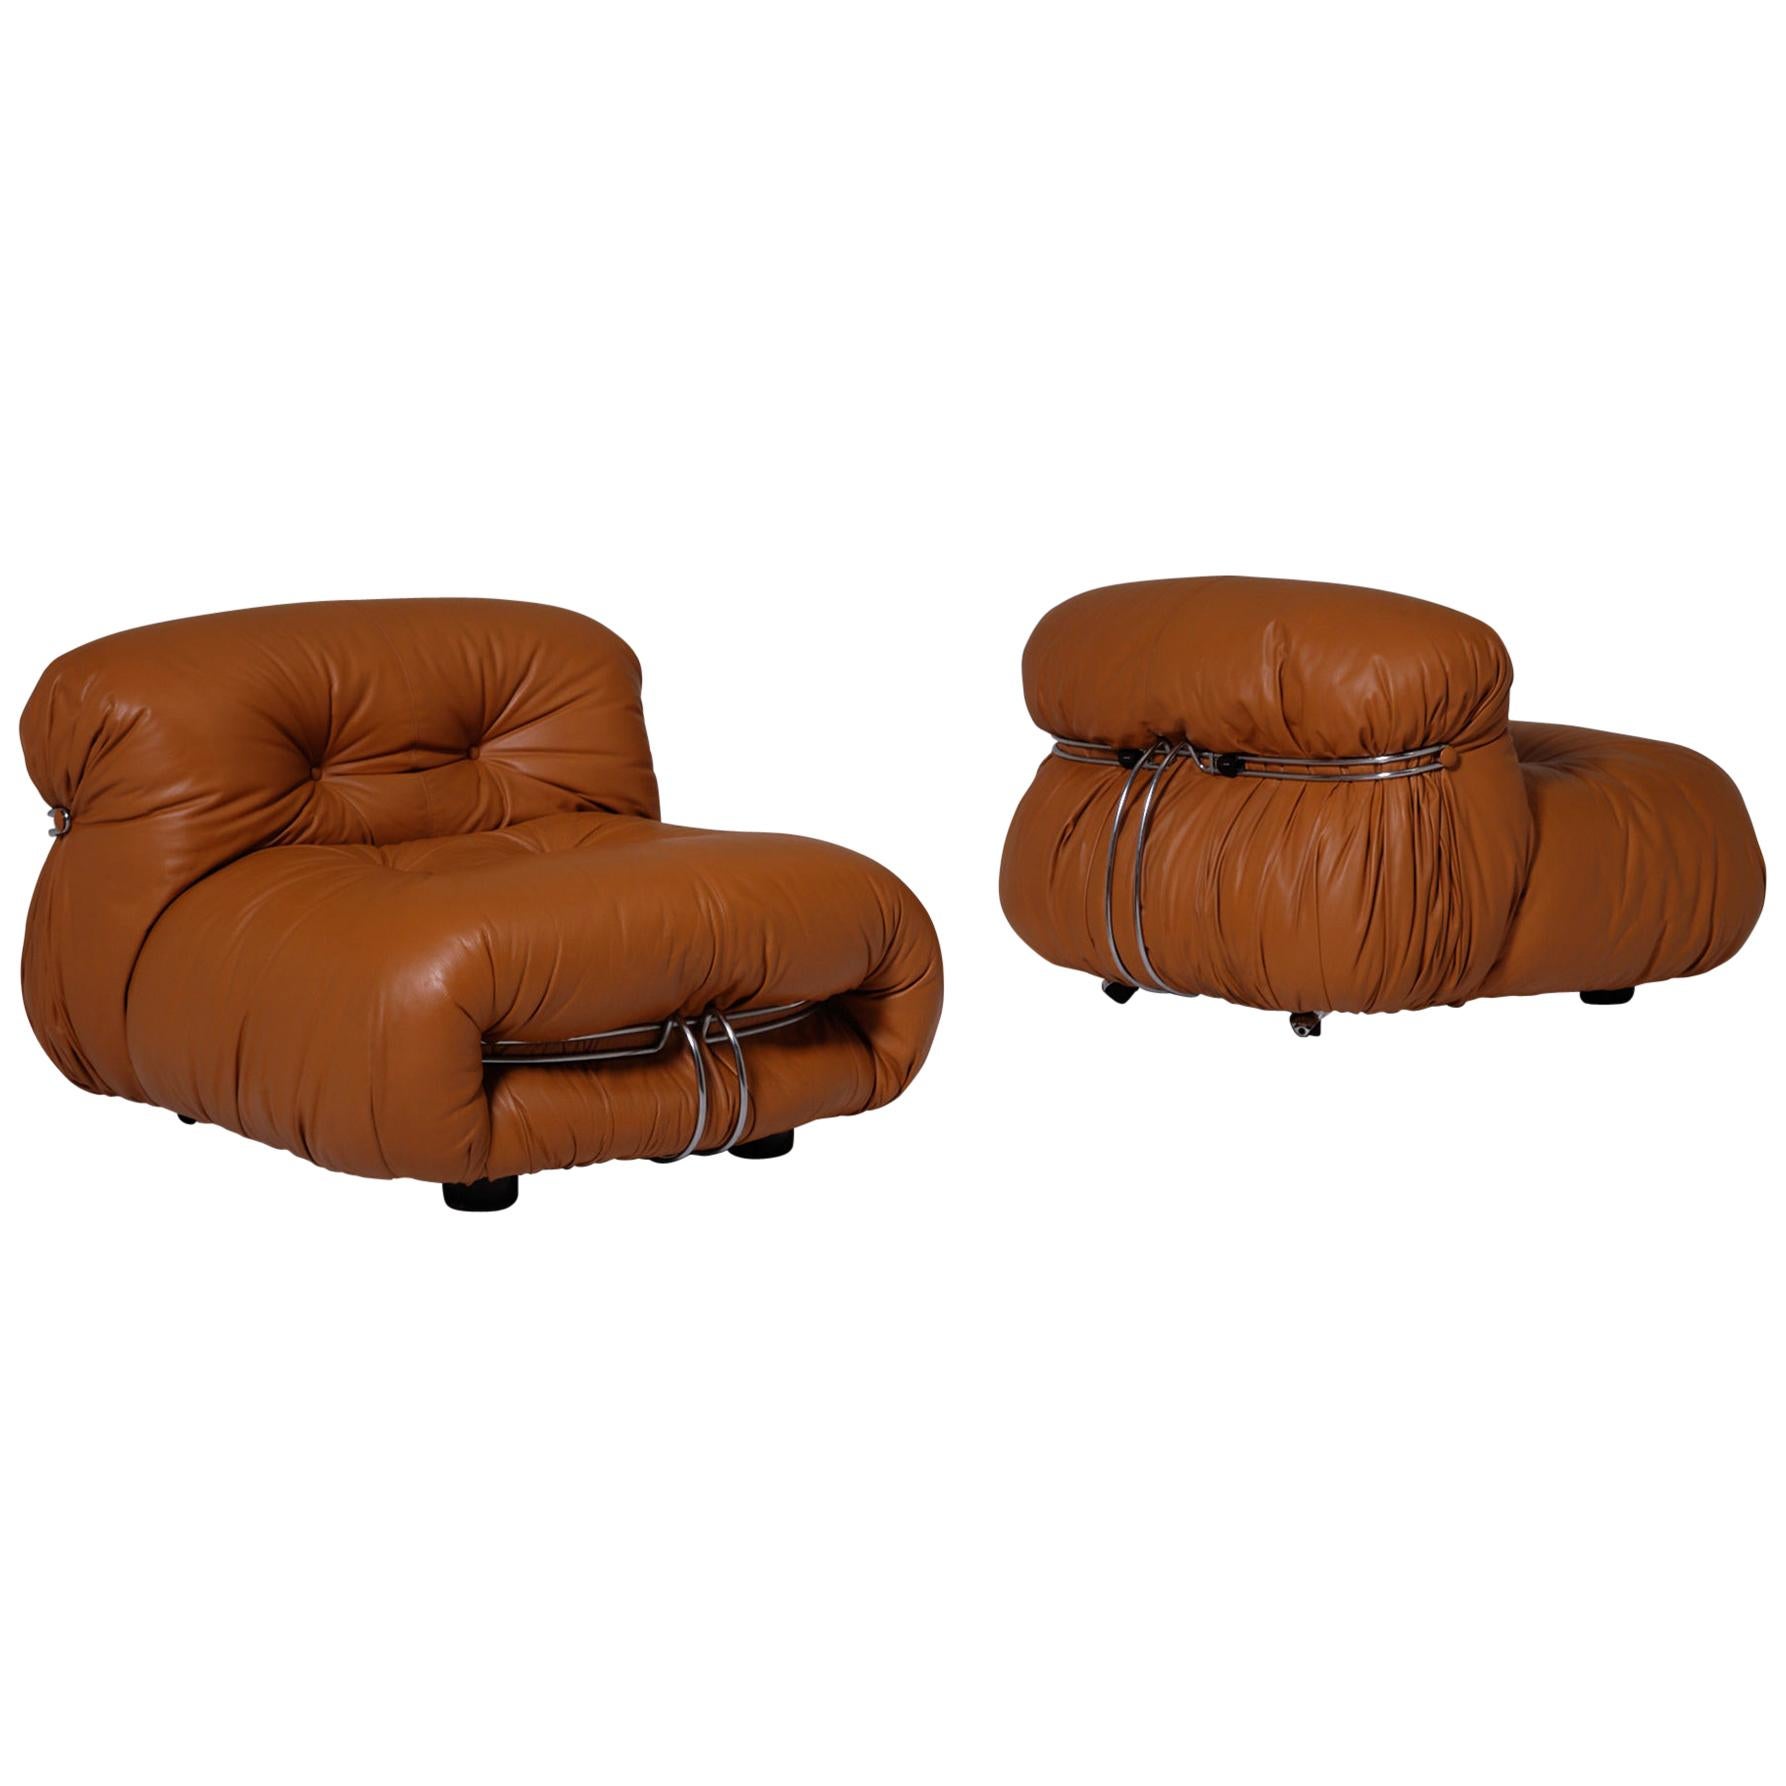 Soriana Lounge Chairs in Cognac Leather by Afra & Tobia Scarpa, Italy, 1969